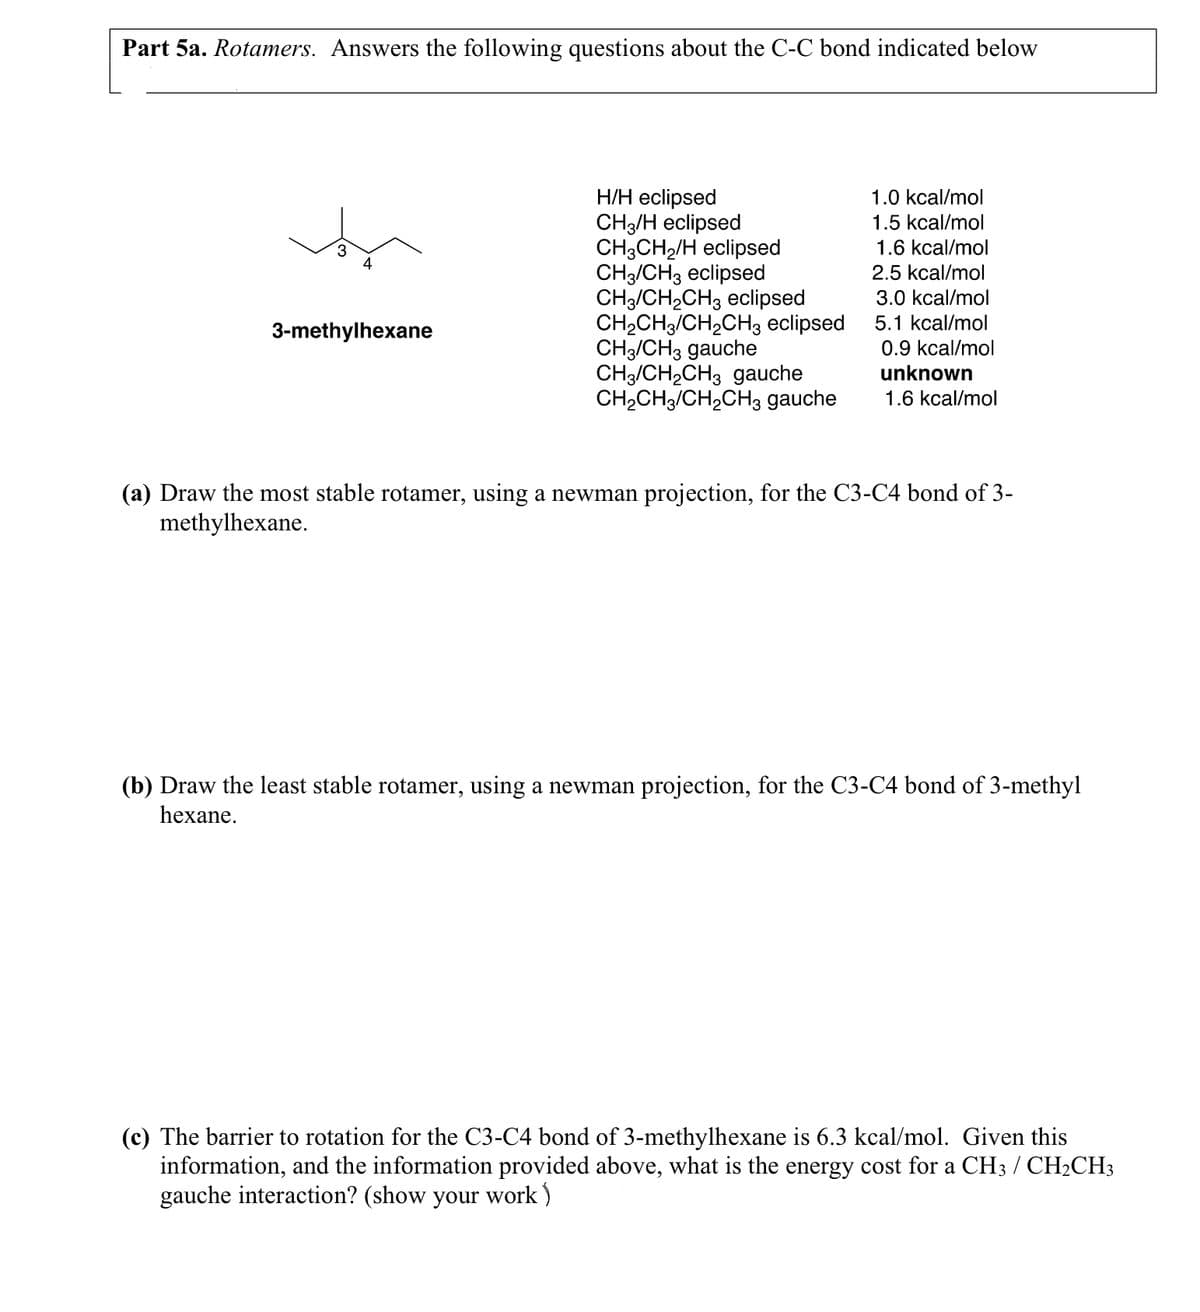 Part 5a. Rotamers. Answers the following questions about the C-C bond indicated below
3
4
3-methylhexane
H/H eclipsed
CH3/H eclipsed
CH3CH₂/H eclipsed
CH3/CH3 eclipsed
CH3/CH₂CH3 eclipsed
CH₂CH3/CH₂CH3 eclipsed
CH3/CH3 gauche
CH3CH₂CH3 gauche
CH₂CH3/CH₂CH3 gauche
1.0 kcal/mol
1.5 kcal/mol
1.6 kcal/mol
2.5 kcal/mol
3.0 kcal/mol
5.1 kcal/mol
0.9 kcal/mol
unknown
1.6 kcal/mol
(a) Draw the most stable rotamer, using a newman projection, for the C3-C4 bond of 3-
methylhexane.
(b) Draw the least stable rotamer, using a newman projection, for the C3-C4 bond of 3-methyl
hexane.
(c) The barrier to rotation for the C3-C4 bond of 3-methylhexane is 6.3 kcal/mol. Given this
information, and the information provided above, what is the energy cost for a CH3 / CH₂CH3
gauche interaction? (show your work)